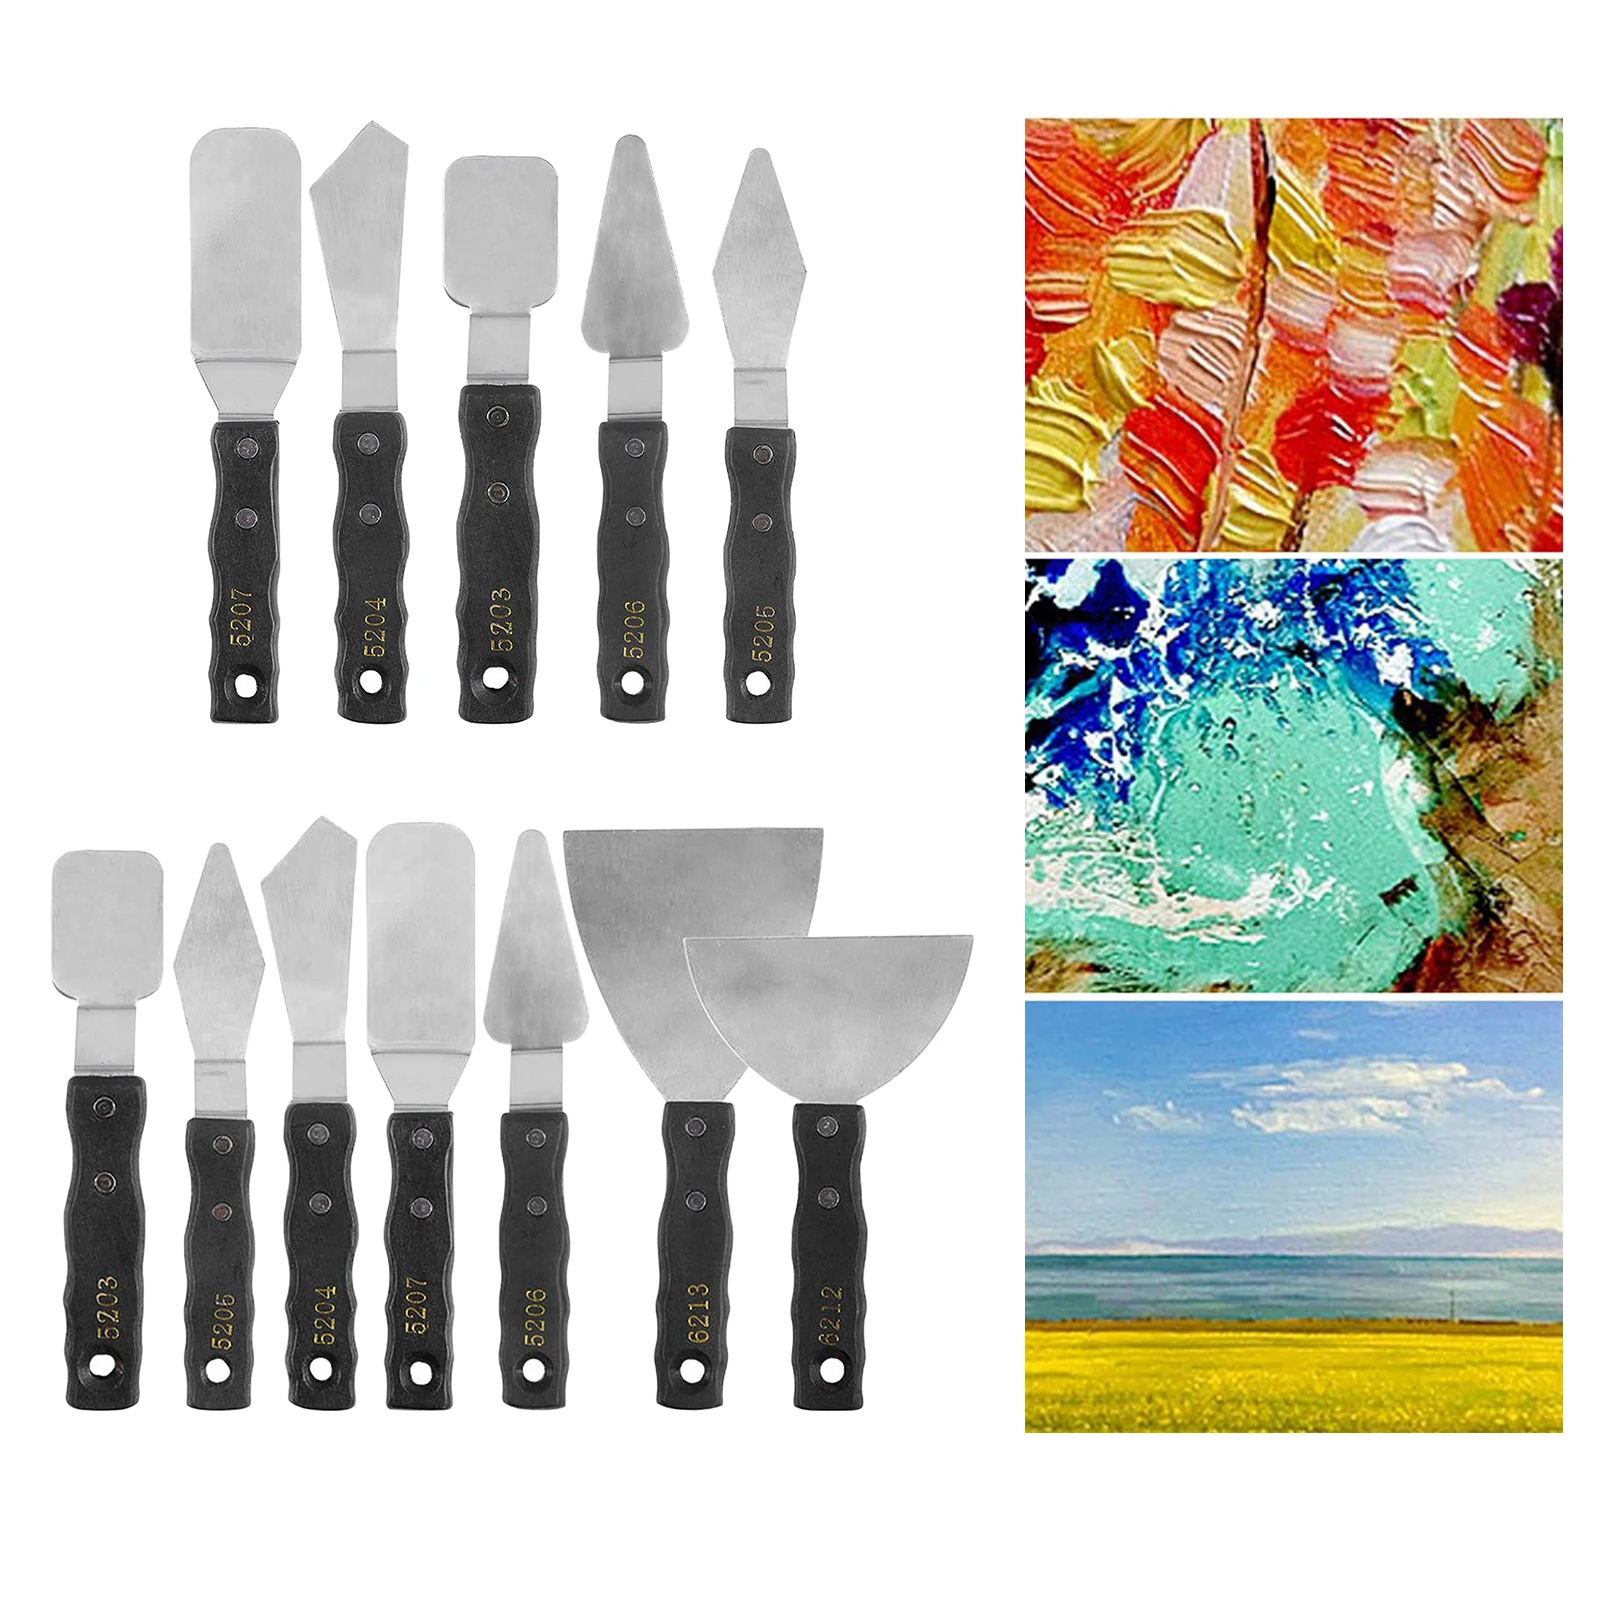 5/7Pcs Wooden Handle Palette Knife Set, Different Sizes and Styles of Stainless Steel Palette Knives for Acrylic Oil Painting